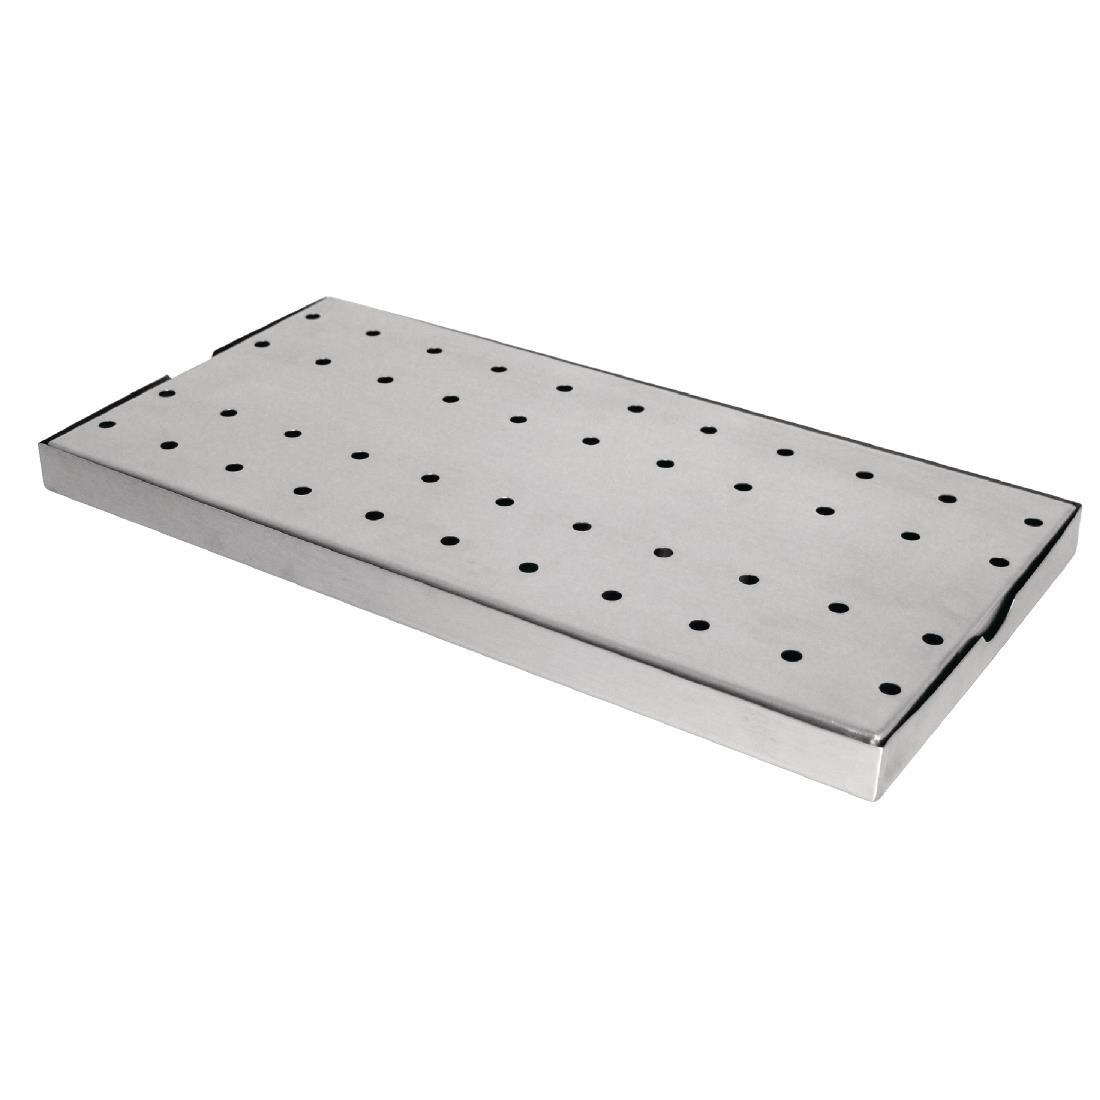 Olympia Stainless Steel Drip Tray 400 x 200mm - DM219  - 1